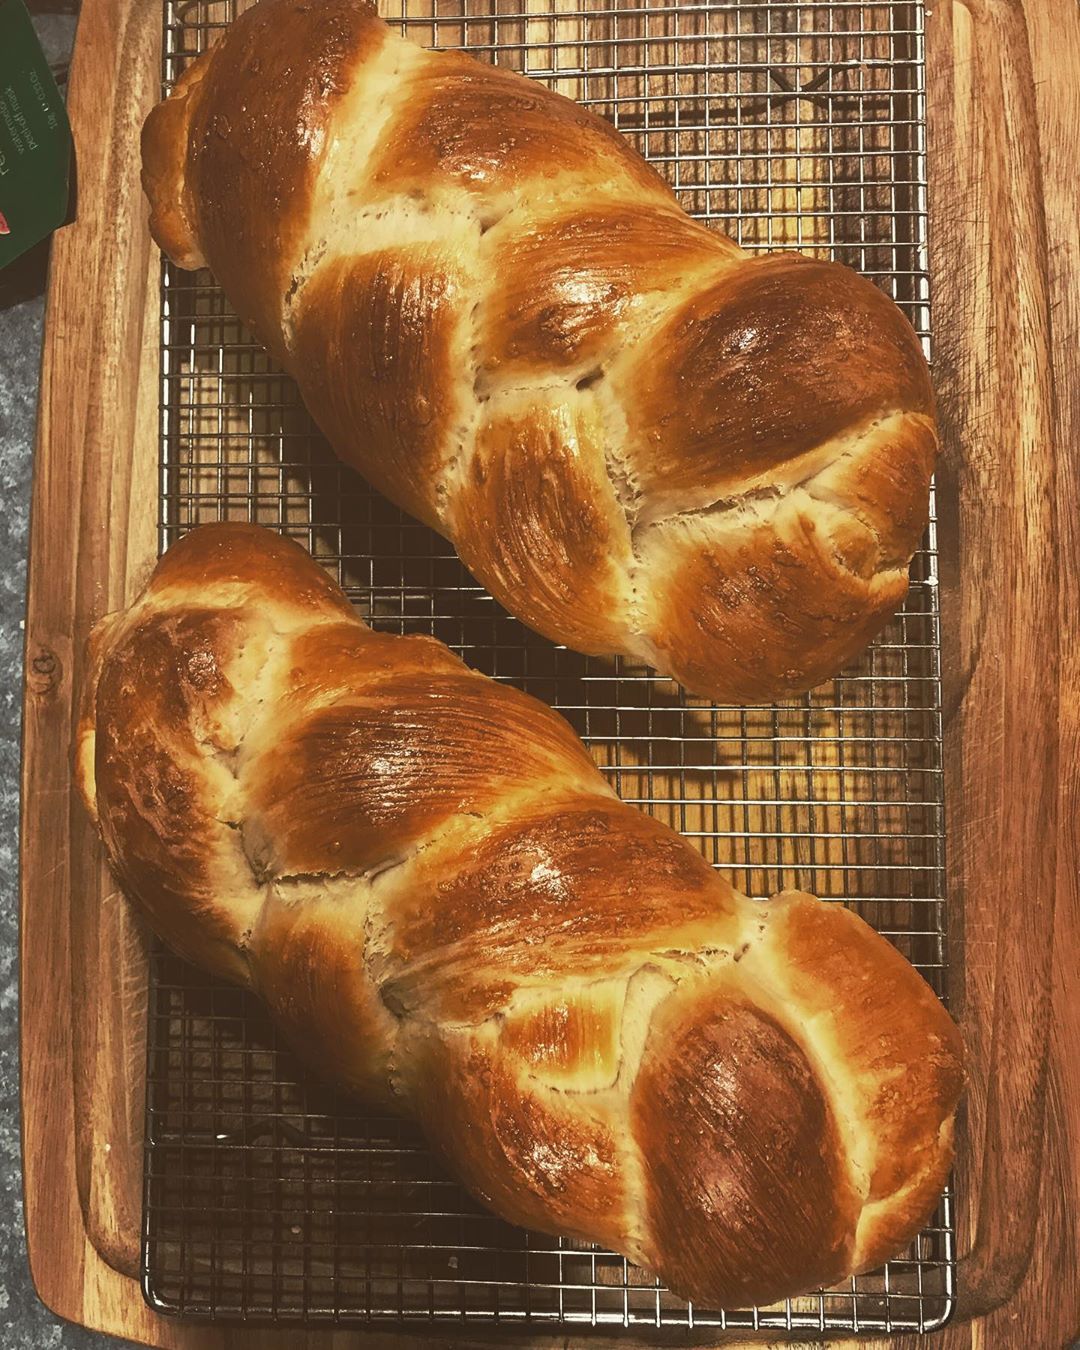 I love making bread for people for the holidays now, but hate that I can’t show anyone until later! I baked this challah bread for @jenjenrock for Chanukah last night, and it’s delicious! 🕎 . #bread #breads #breadstagram #breadsofinstagram #baking...